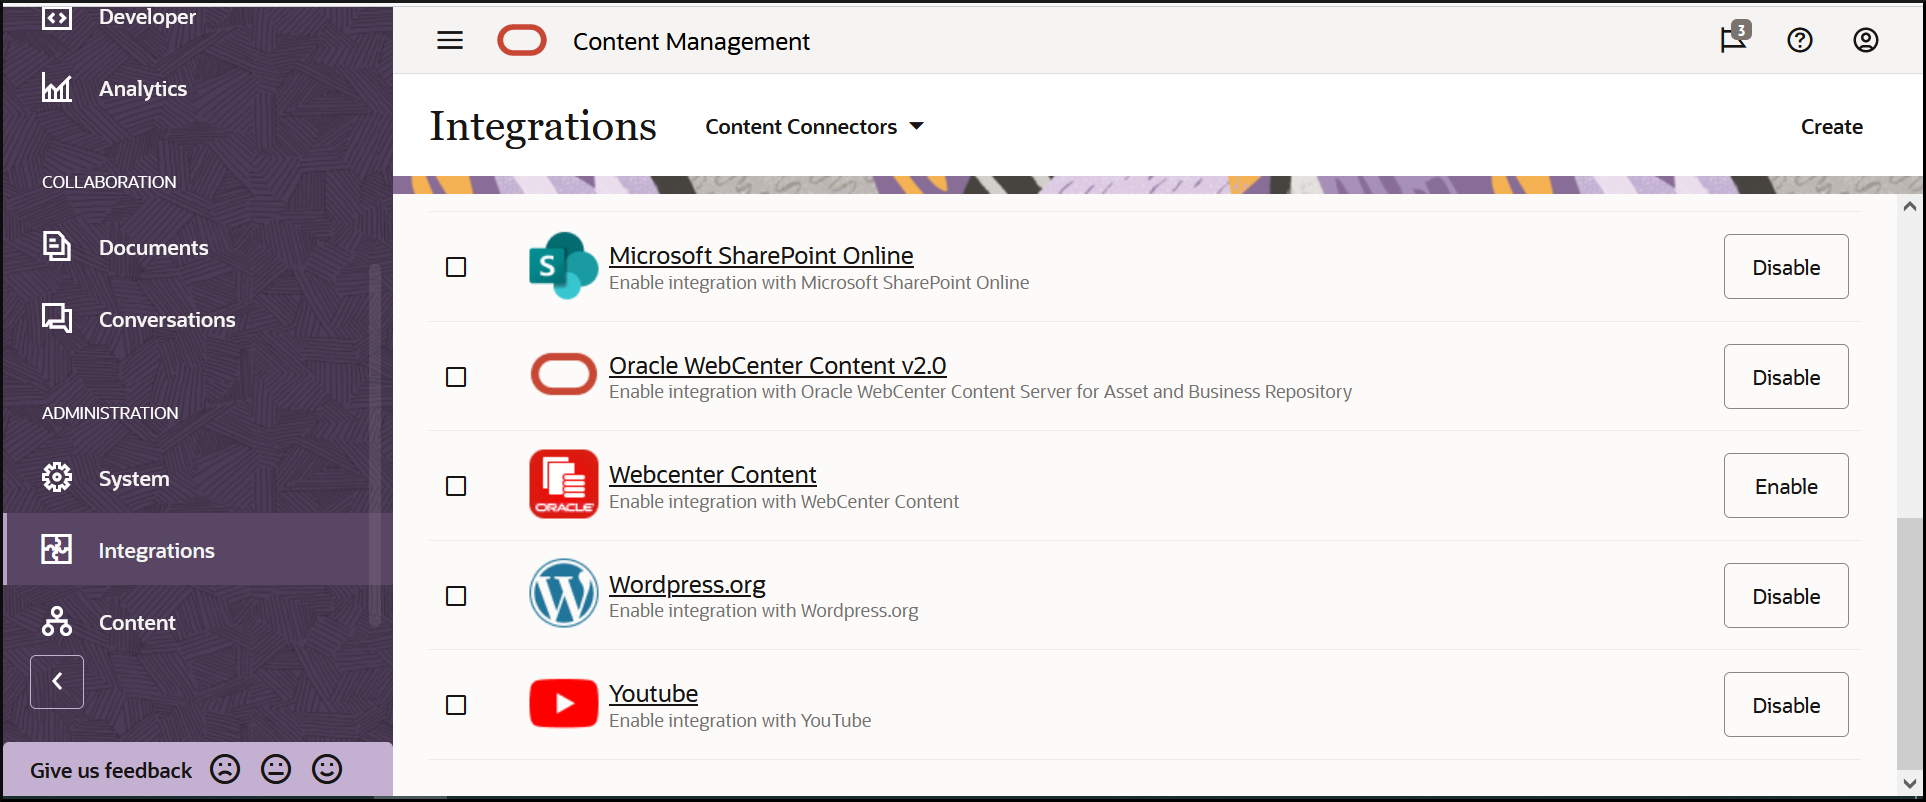 Oracle WebCenter Content v2.0 and other content connectors.